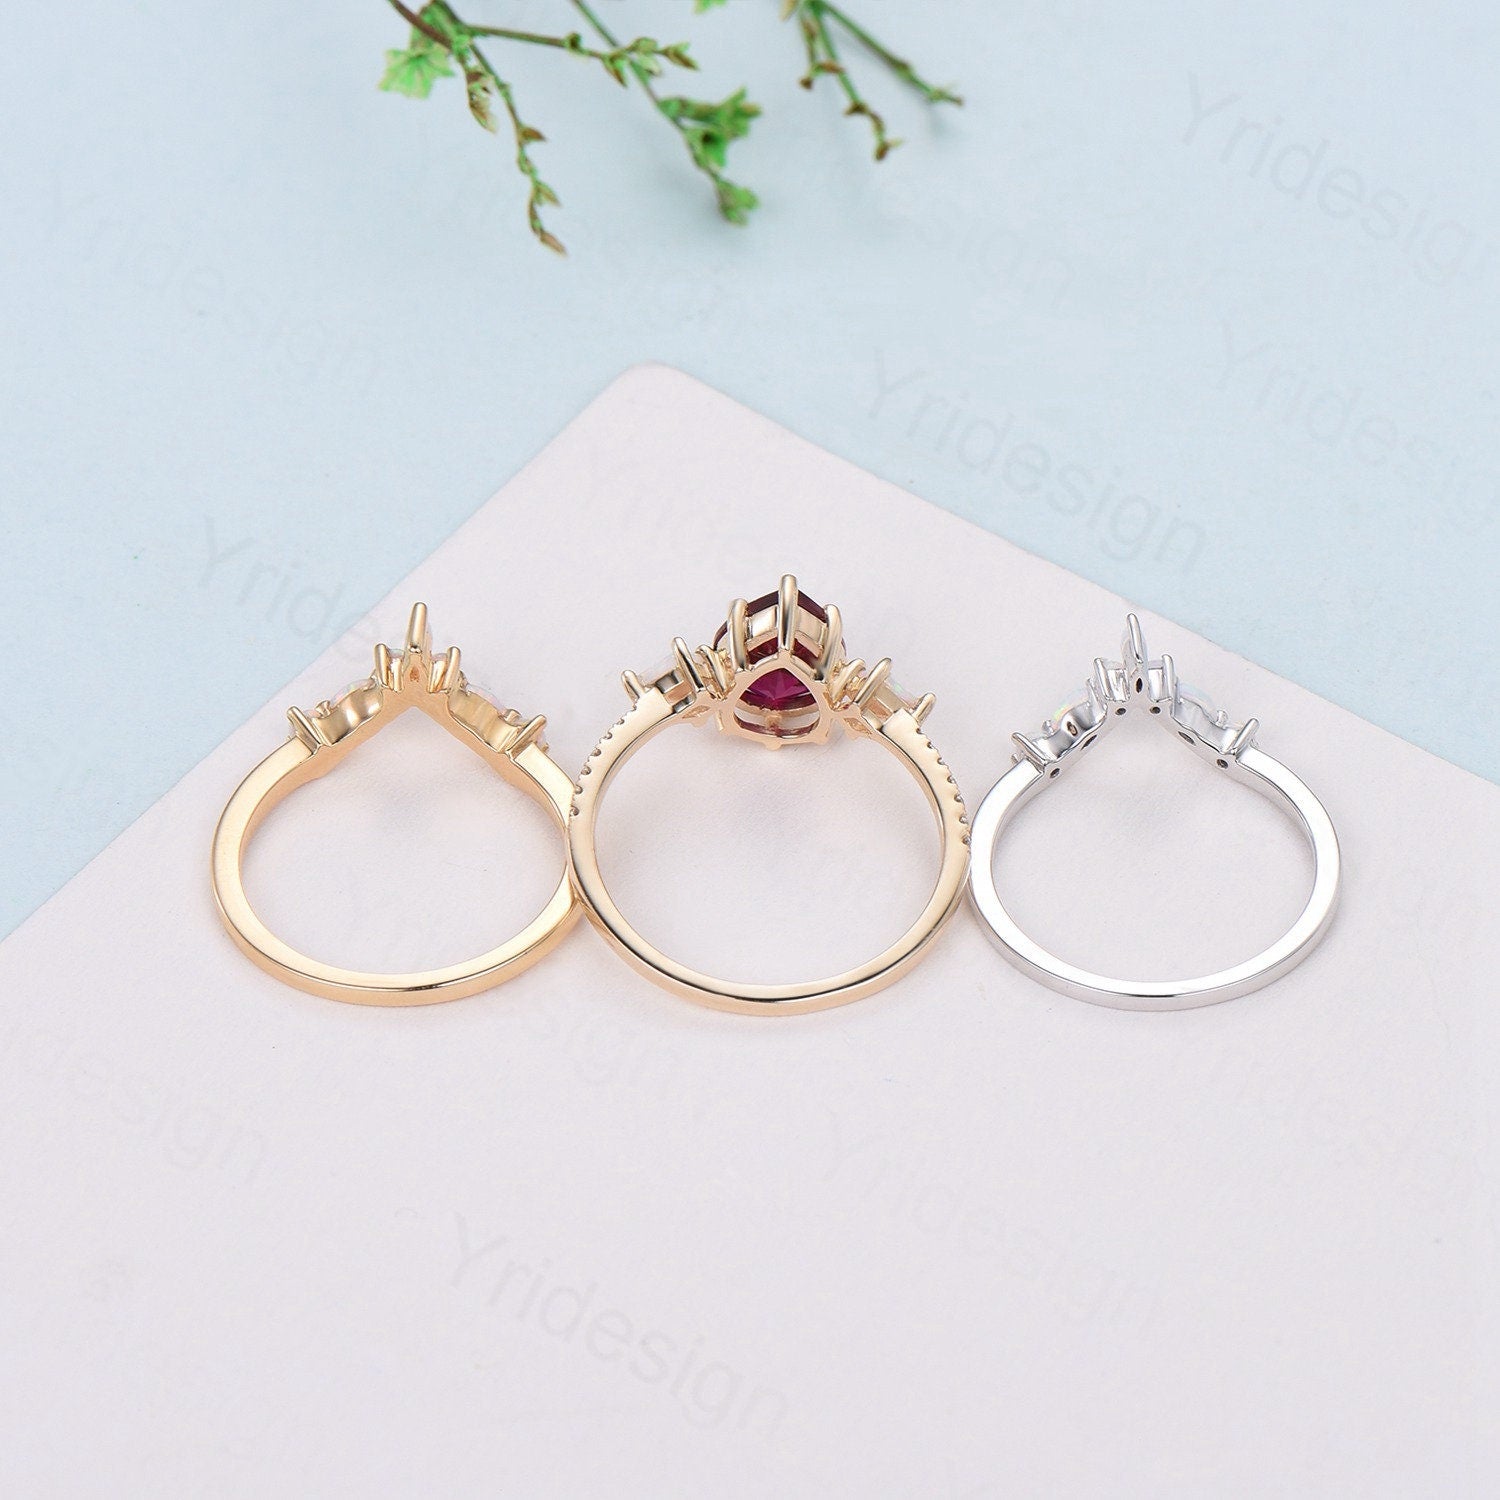 Vintage Pear Shaped Ruby Engagement Ring Set Three Stone Kite Ruby Opal Wedding ring Set Cute Opal Stacking Band Unique Bridal Set For Women - PENFINE